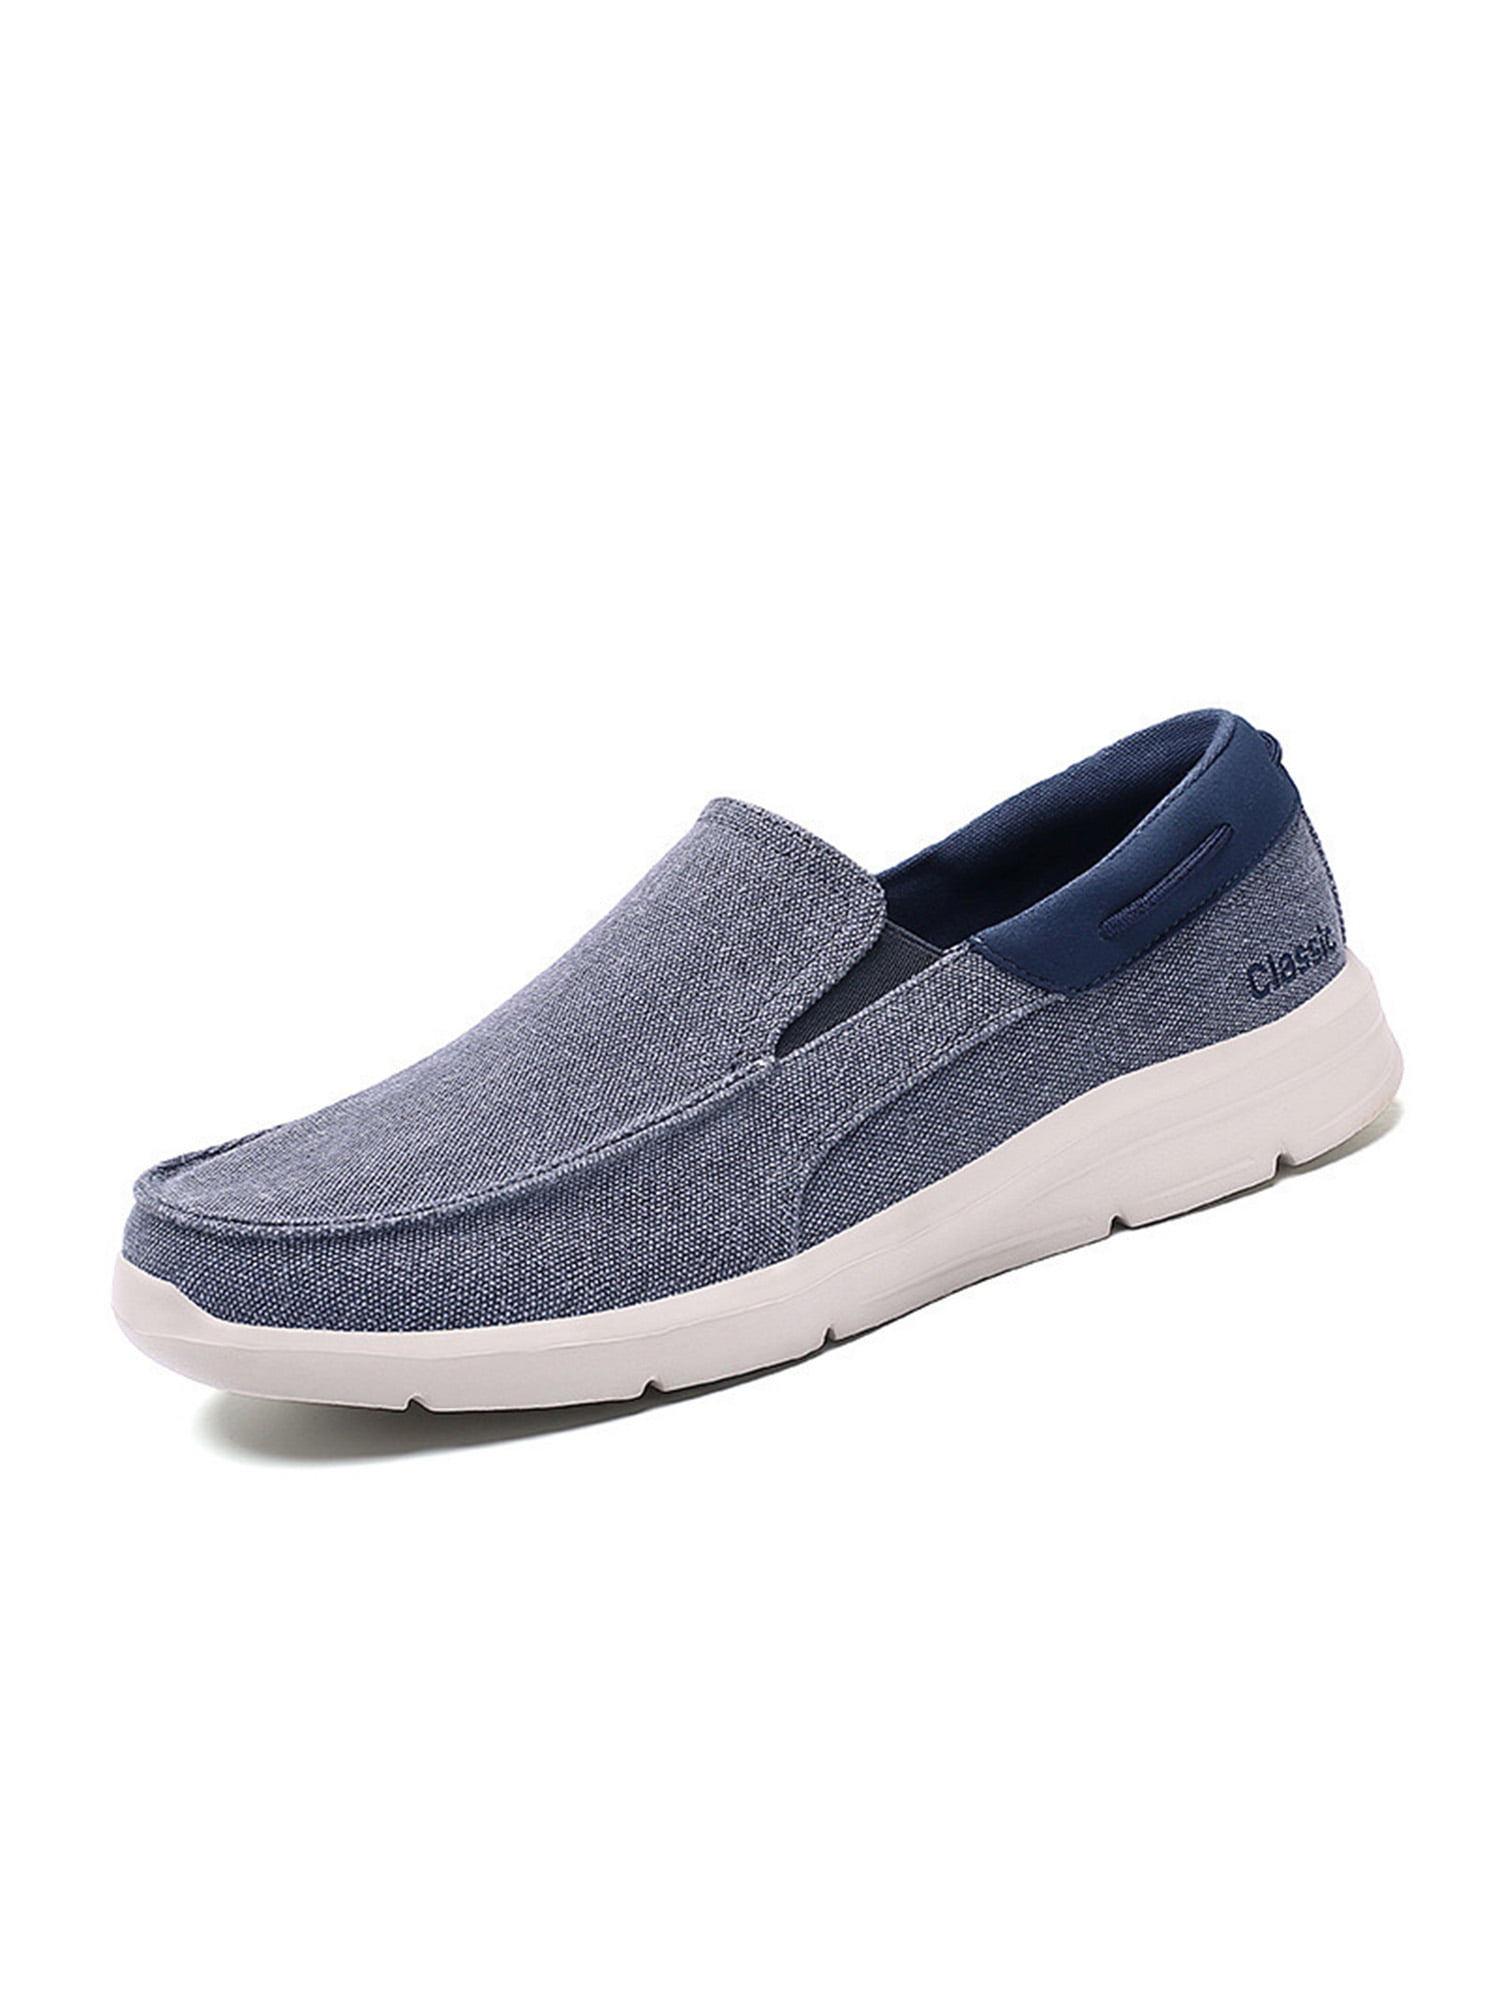 Men's Loafers Breathable Flats Driving Boat Slip On Comfy  Casual Canvas Shoes 